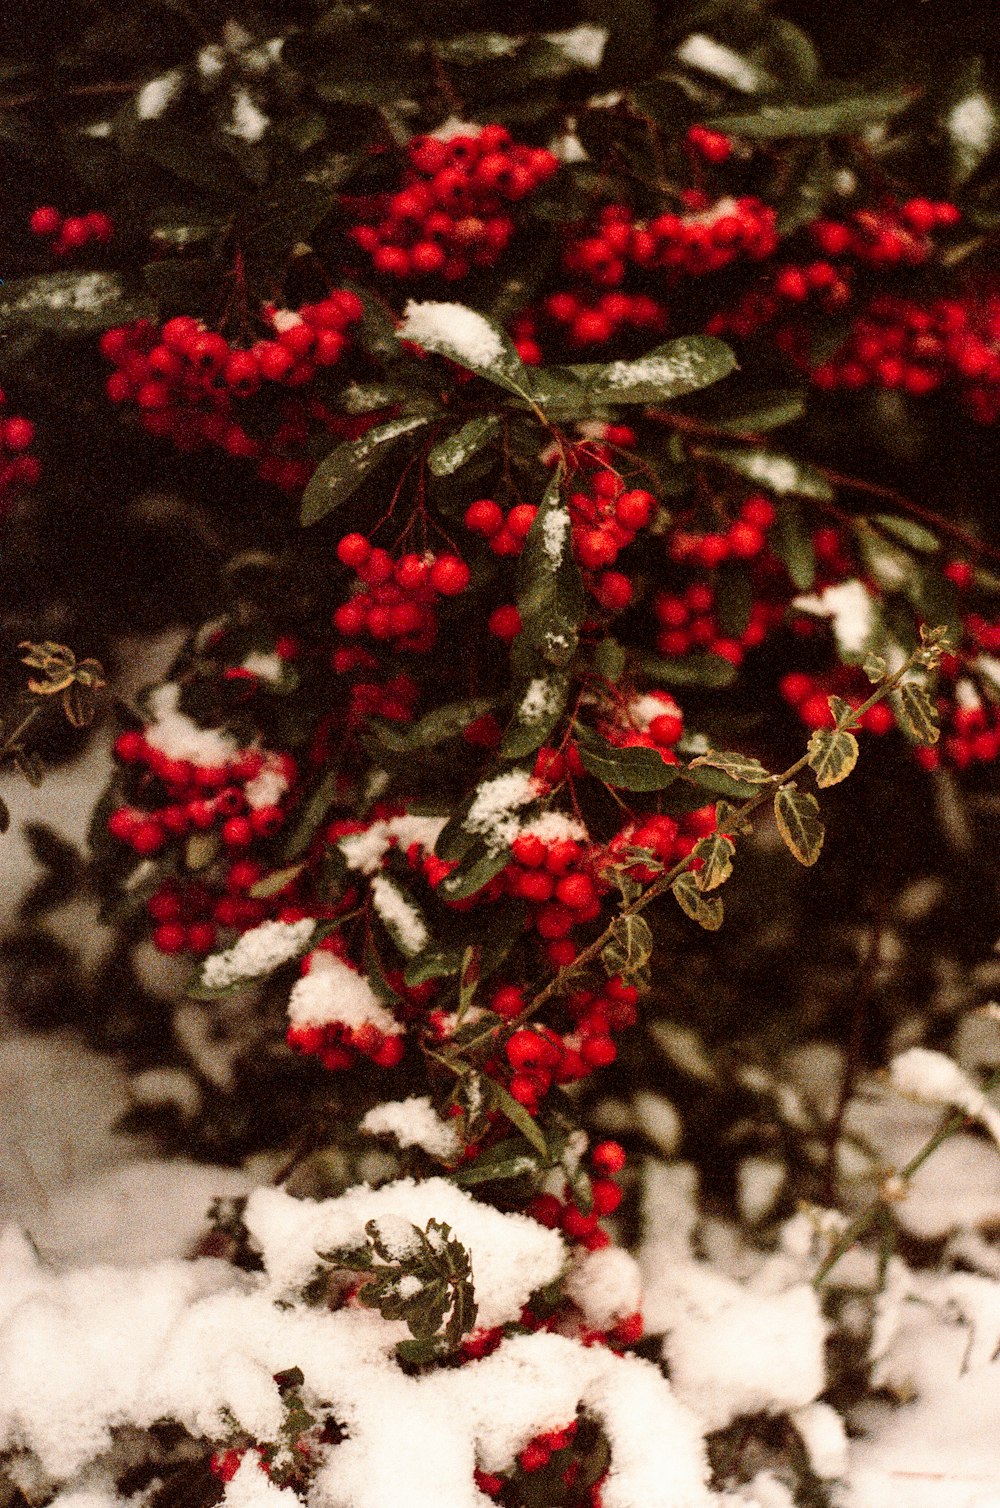 a bush with red berries and green leaves covered in snow